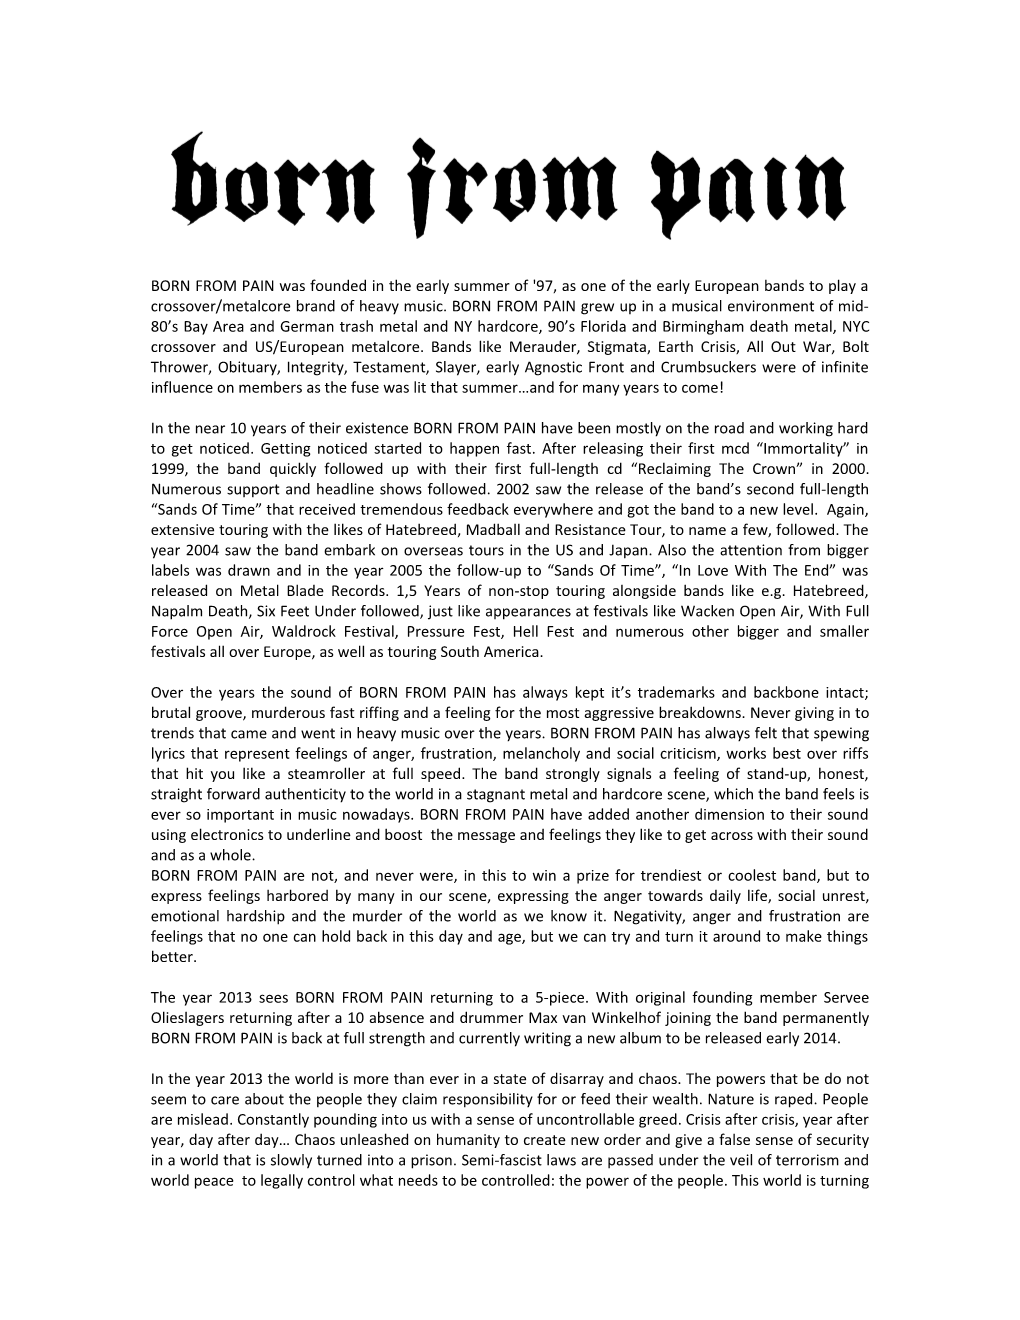 BORN from PAIN Biography